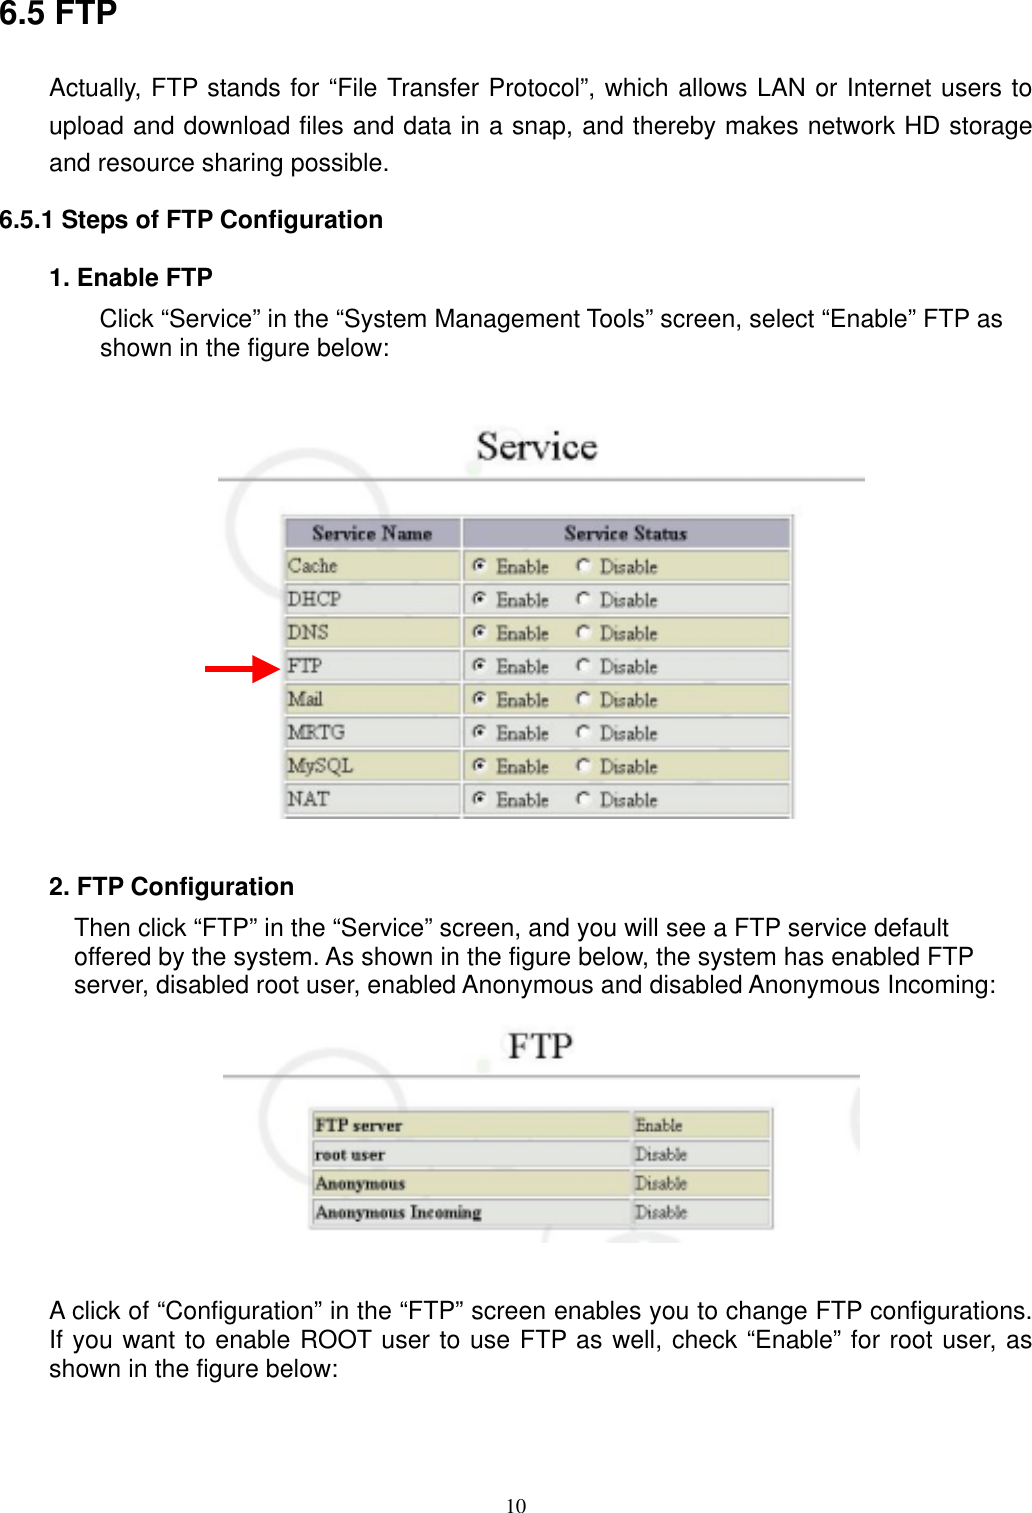  106.5 FTP Actually, FTP stands for “File Transfer Protocol”, which allows LAN or Internet users to upload and download files and data in a snap, and thereby makes network HD storage and resource sharing possible.   6.5.1 Steps of FTP Configuration 1. Enable FTP Click “Service” in the “System Management Tools” screen, select “Enable” FTP as shown in the figure below:      2. FTP Configuration Then click “FTP” in the “Service” screen, and you will see a FTP service default offered by the system. As shown in the figure below, the system has enabled FTP server, disabled root user, enabled Anonymous and disabled Anonymous Incoming:   A click of “Configuration” in the “FTP” screen enables you to change FTP configurations. If you want to enable ROOT user to use FTP as well, check “Enable” for root user, as shown in the figure below:  